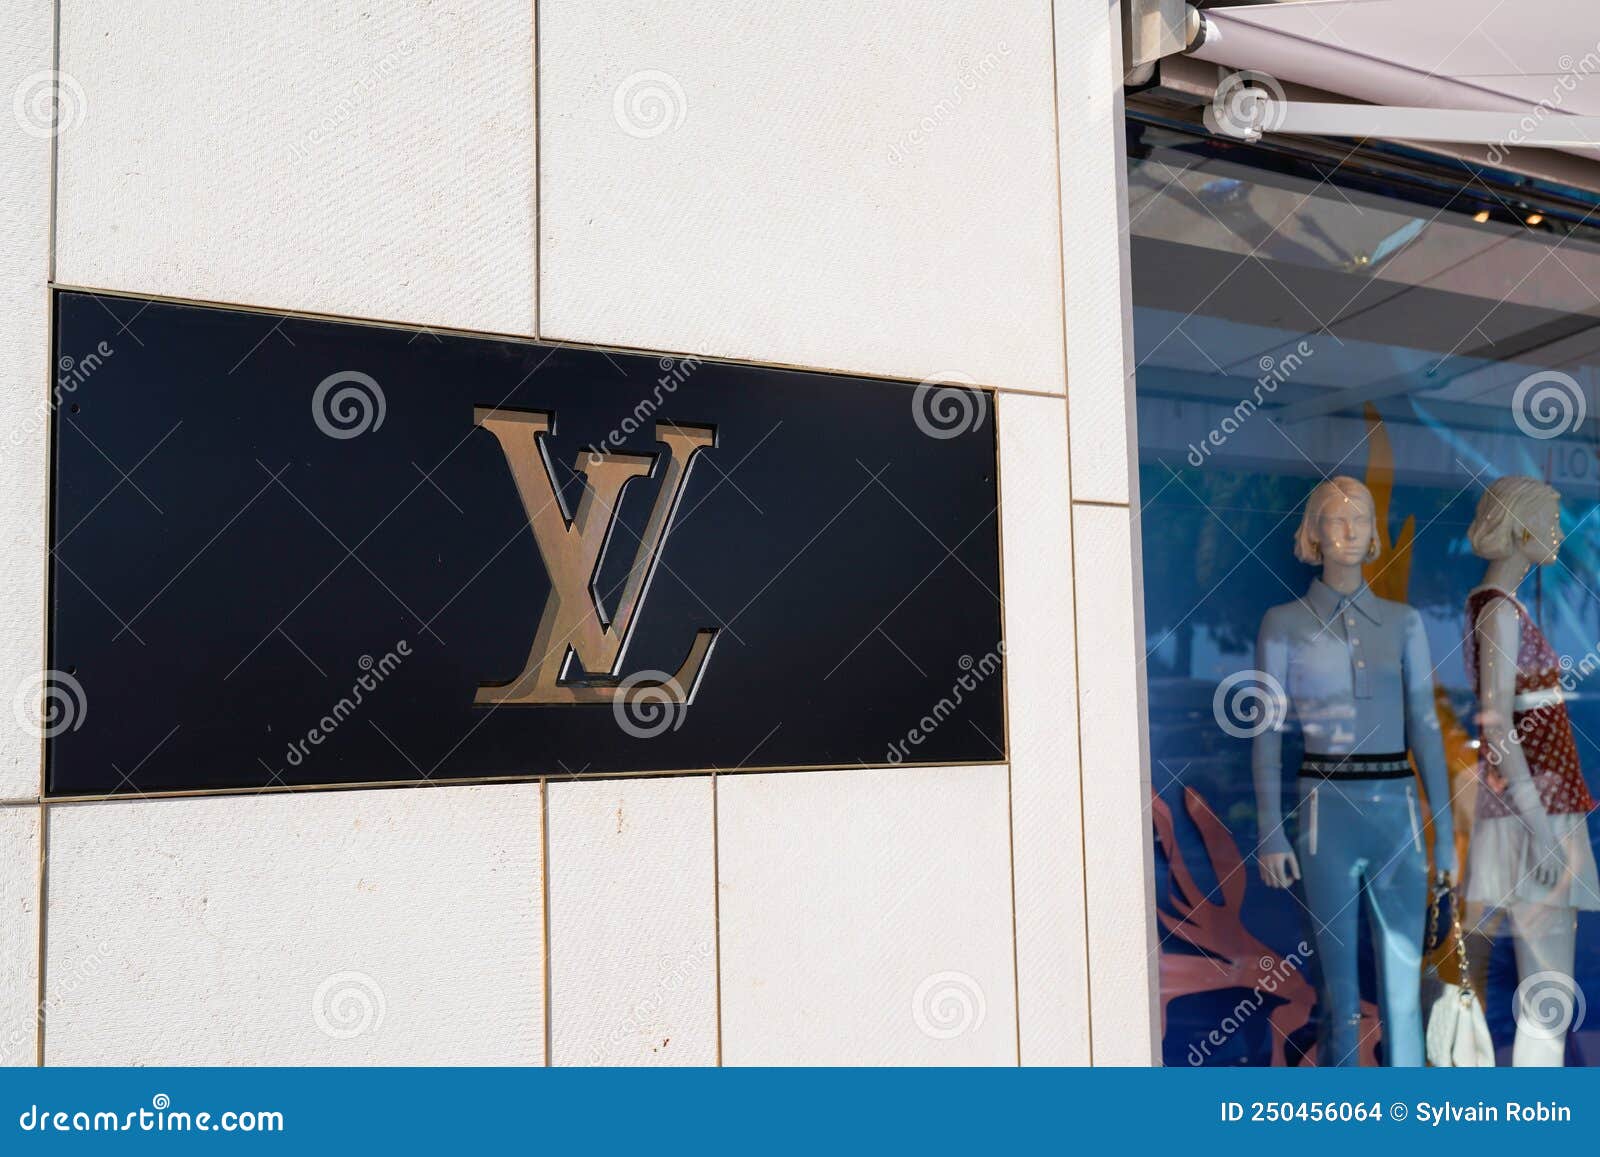 Louis Vuitton Store In Cannes